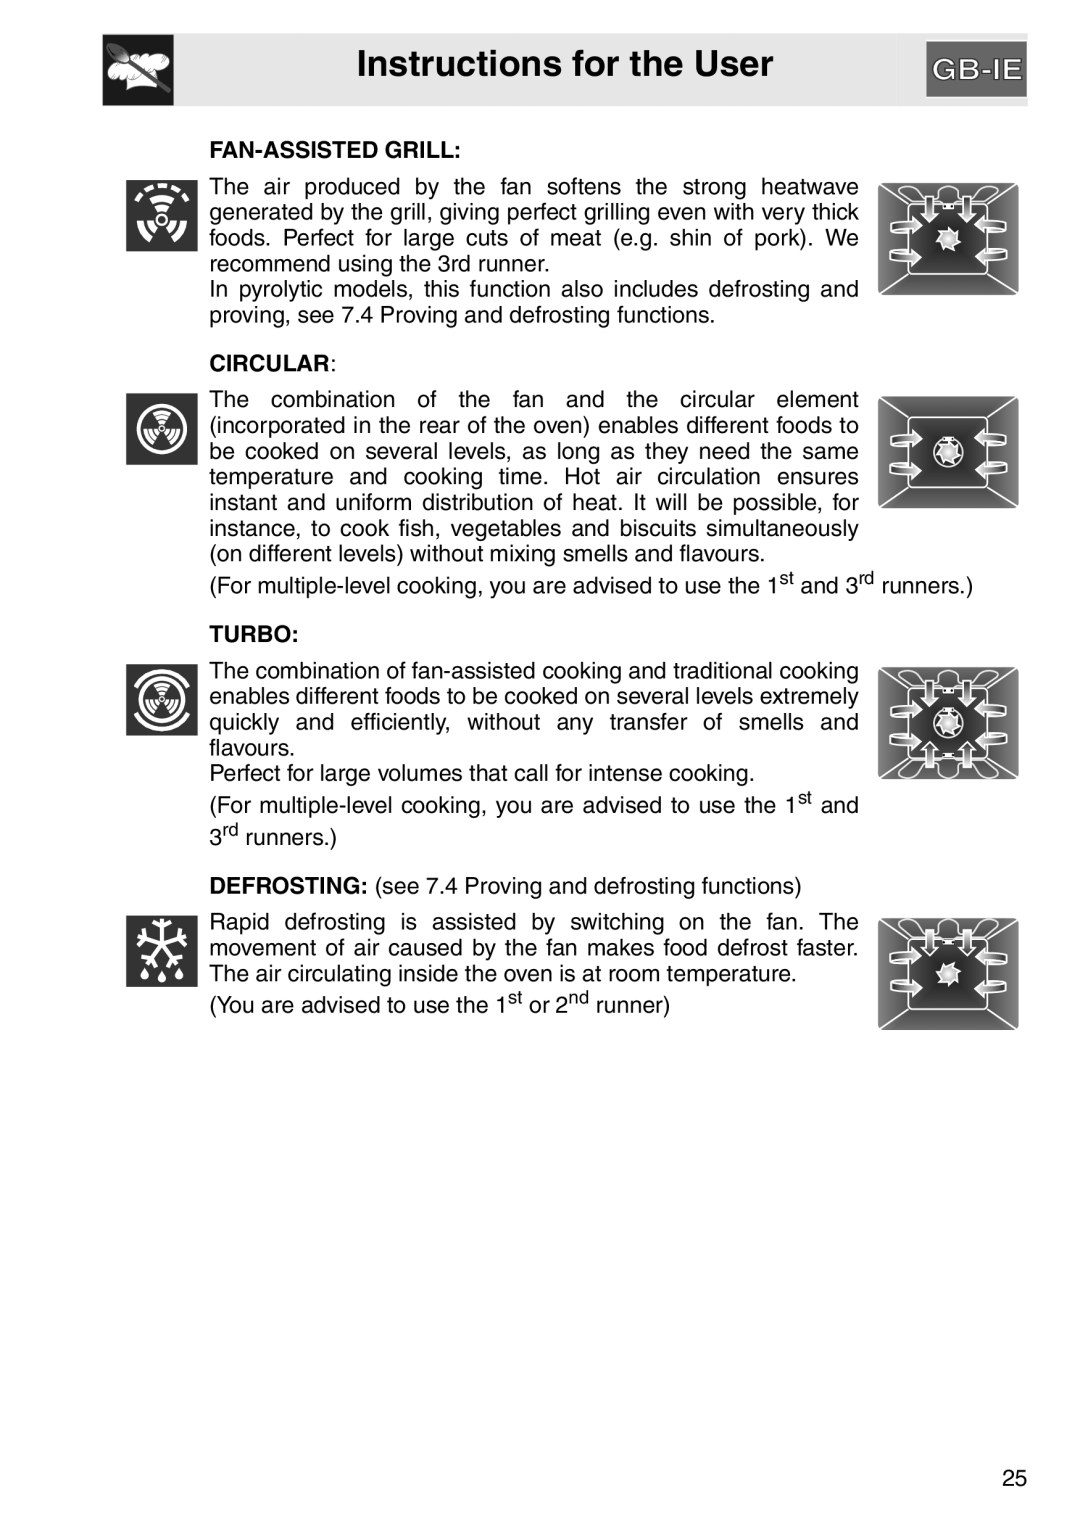 Smeg SA561X-9 installation instructions Instructions for the User, Fan-Assisted Grill, Circular, Turbo 